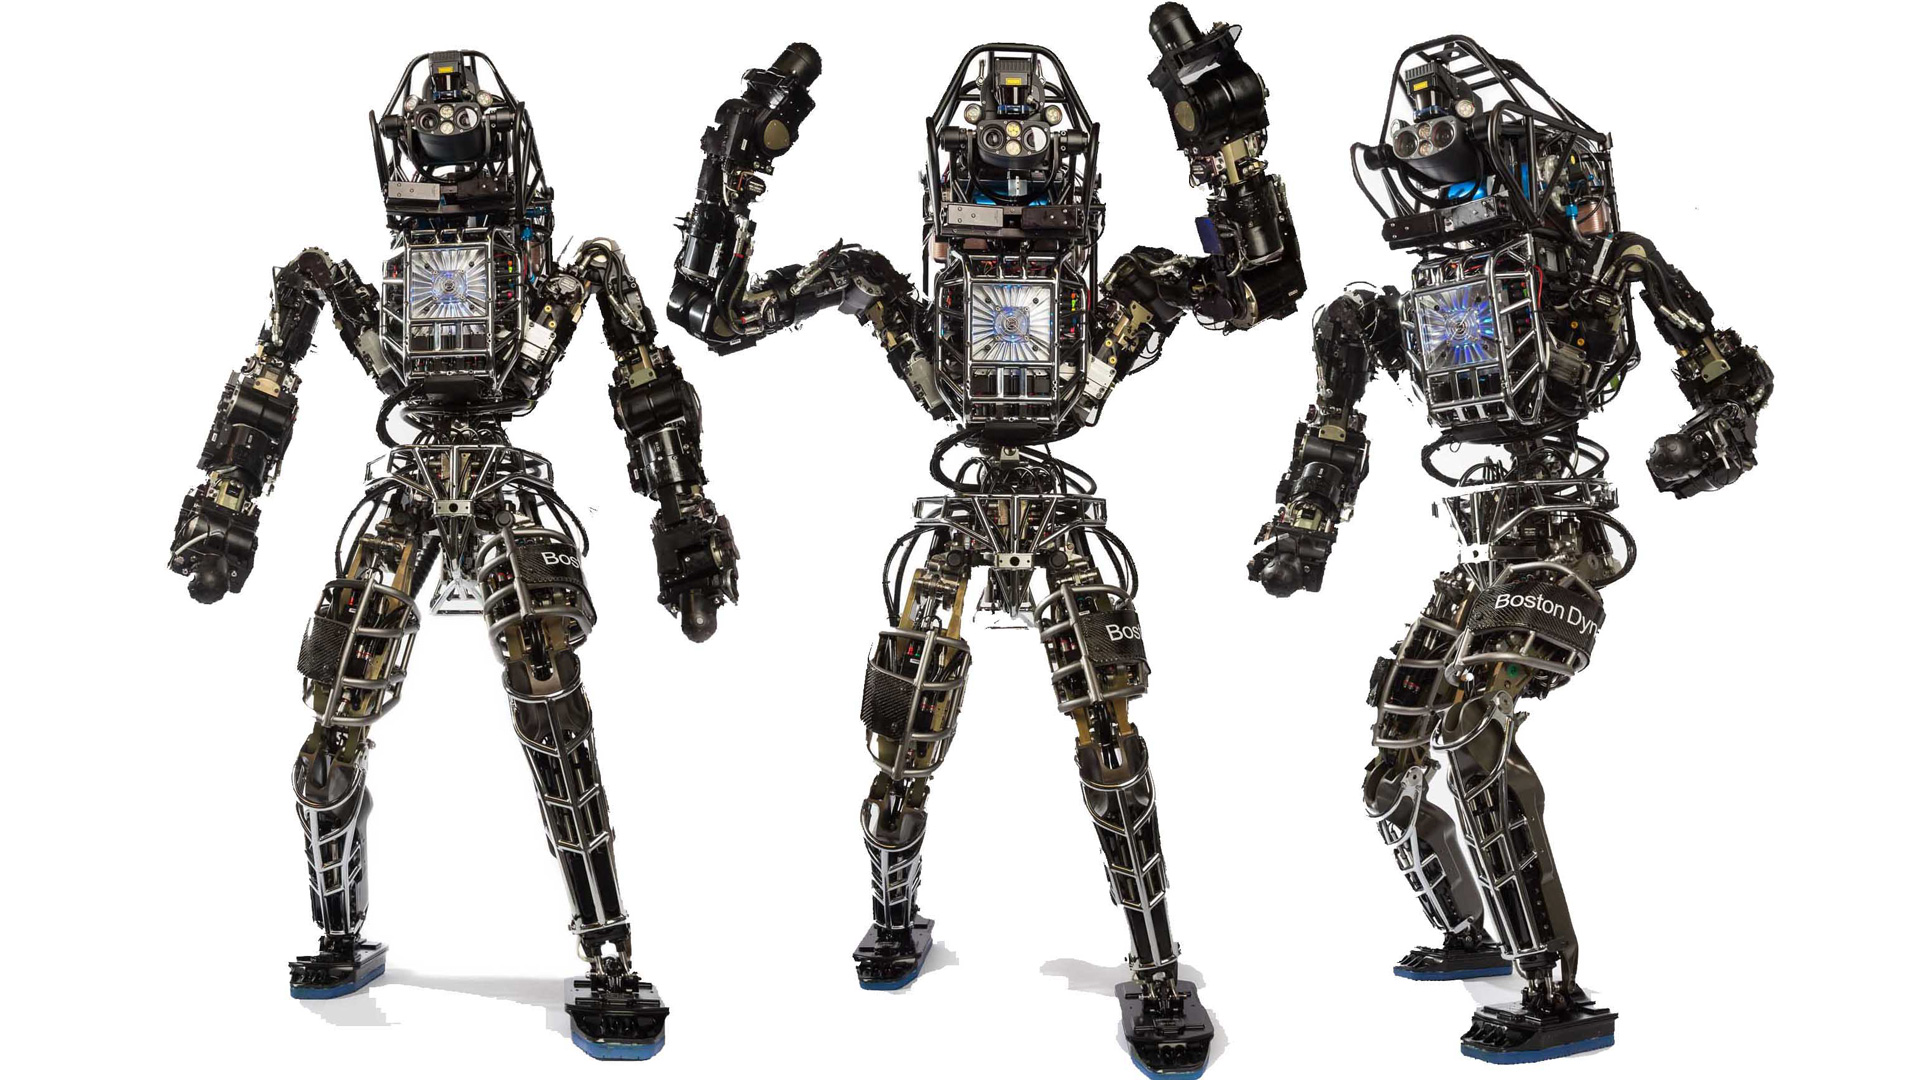 Atlas Robots now owned by google are not terminators, they are autonomous military robots. see completely different.